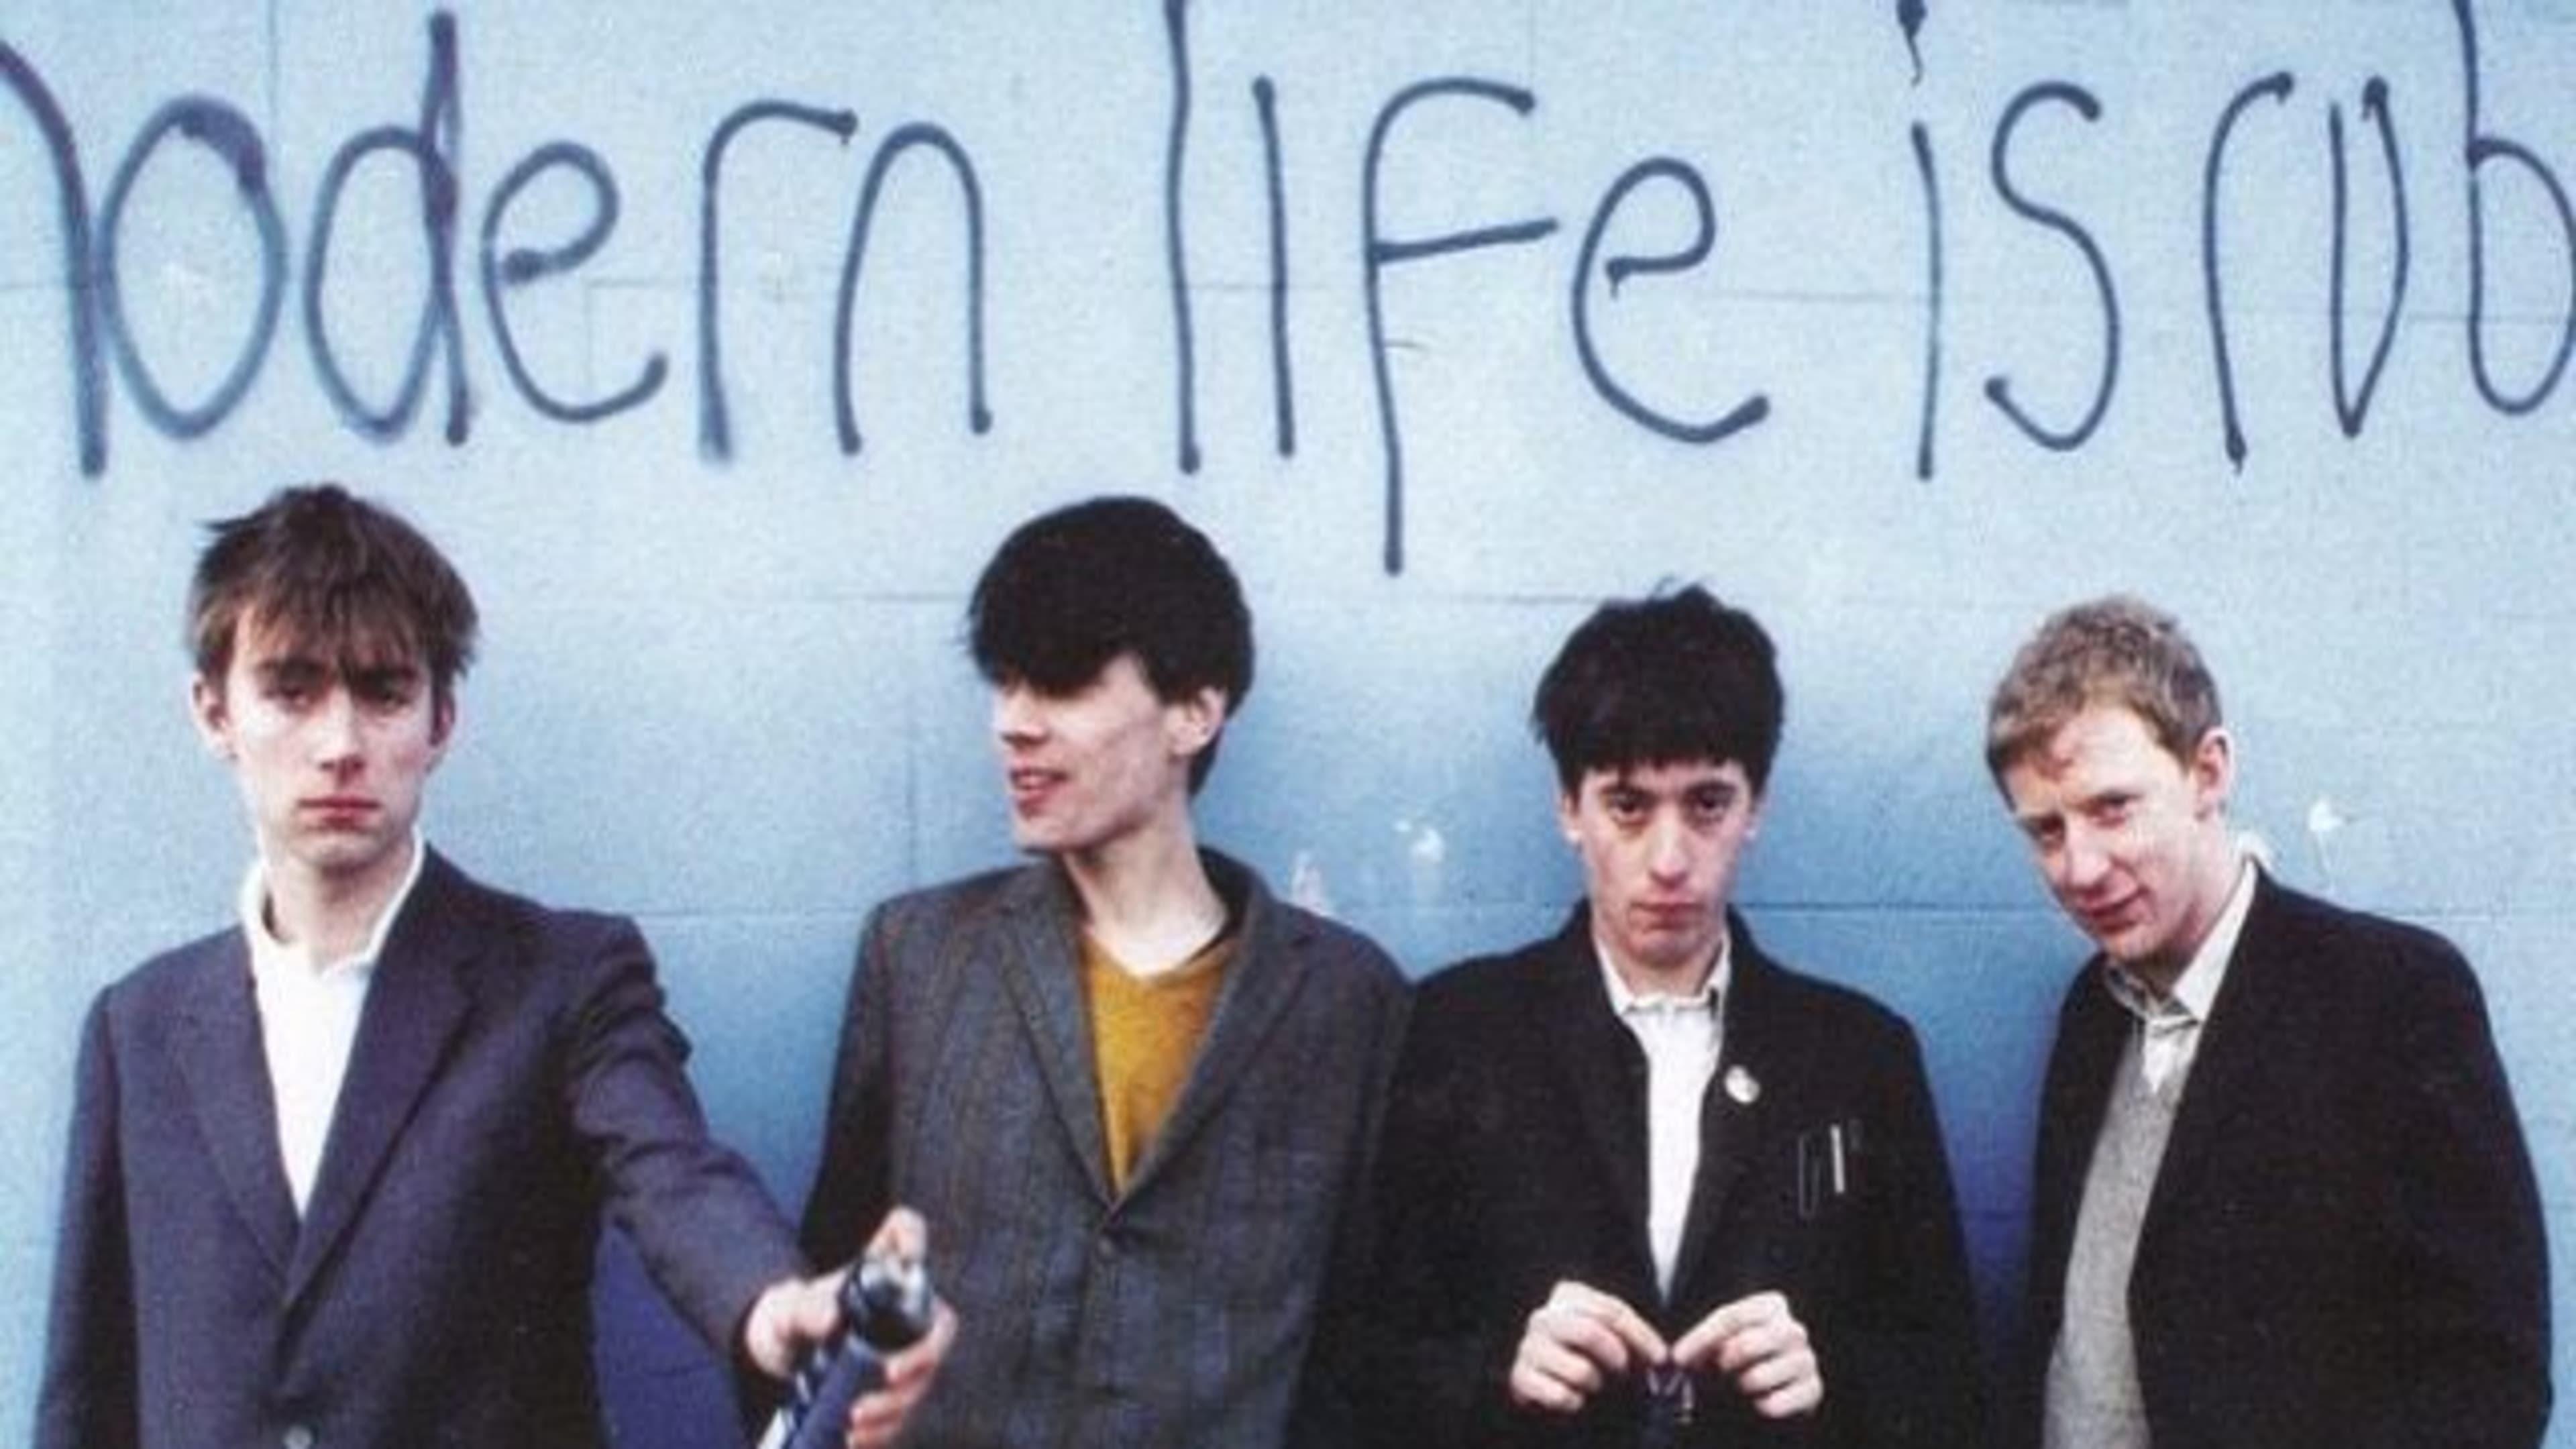 Inside The Album with Graham Coxon from Blur - "Modern Life Is Rubbish" backdrop